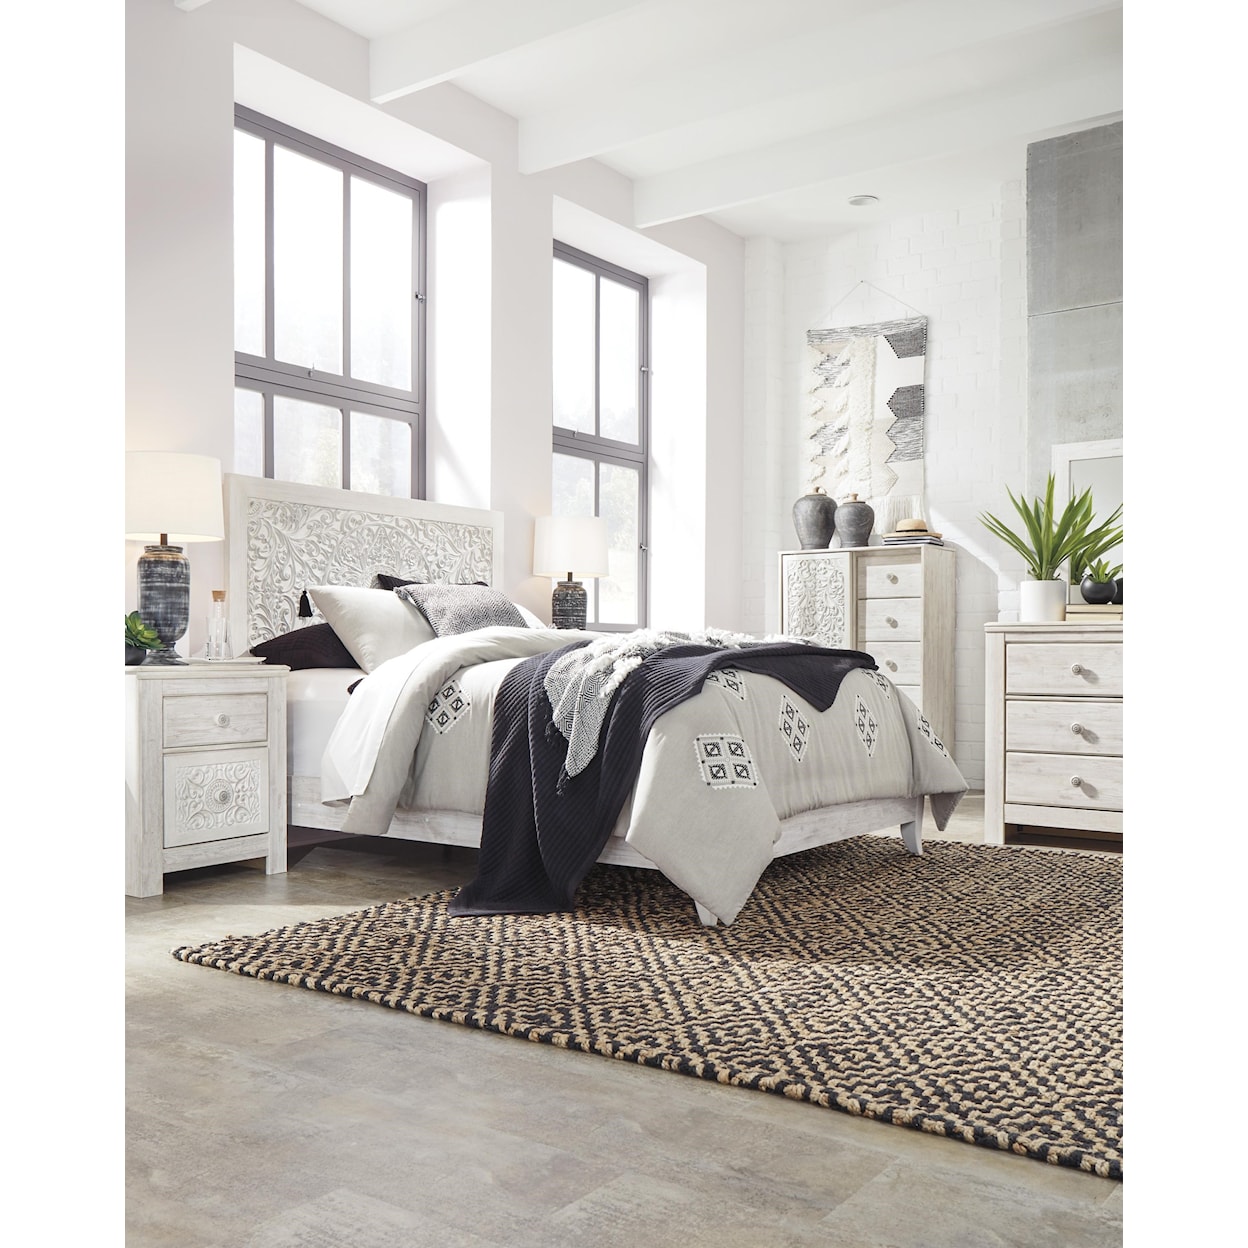 Signature Design by Ashley Paxberry 5 Piece Queen Bedroom Set